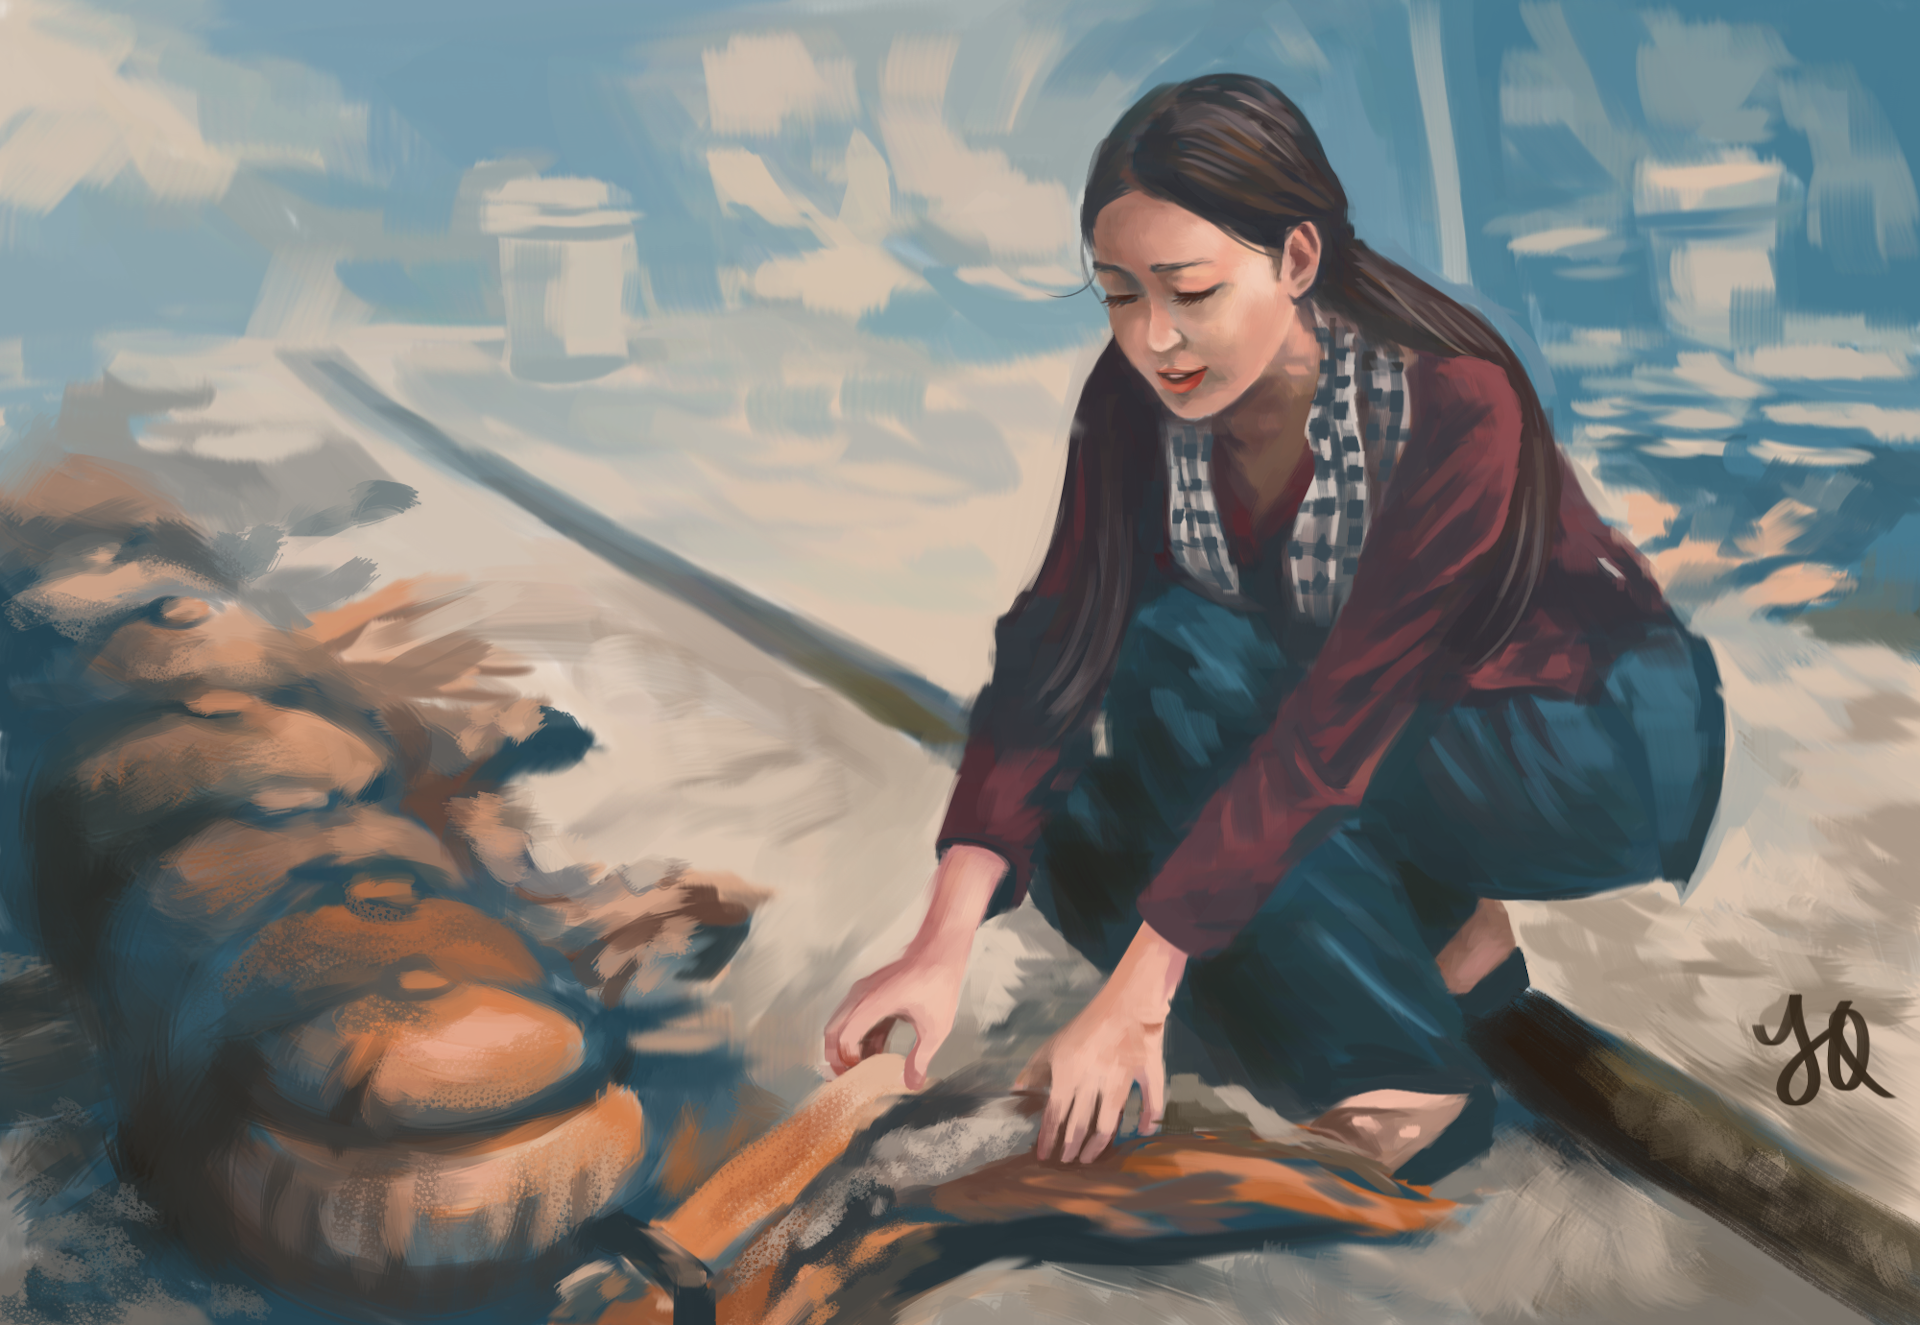 A digital painting photo study of a lady in a dark red blouse and dark blue trousers, squatting by a row of large ceramic pots and tending to the firewood beneath them.